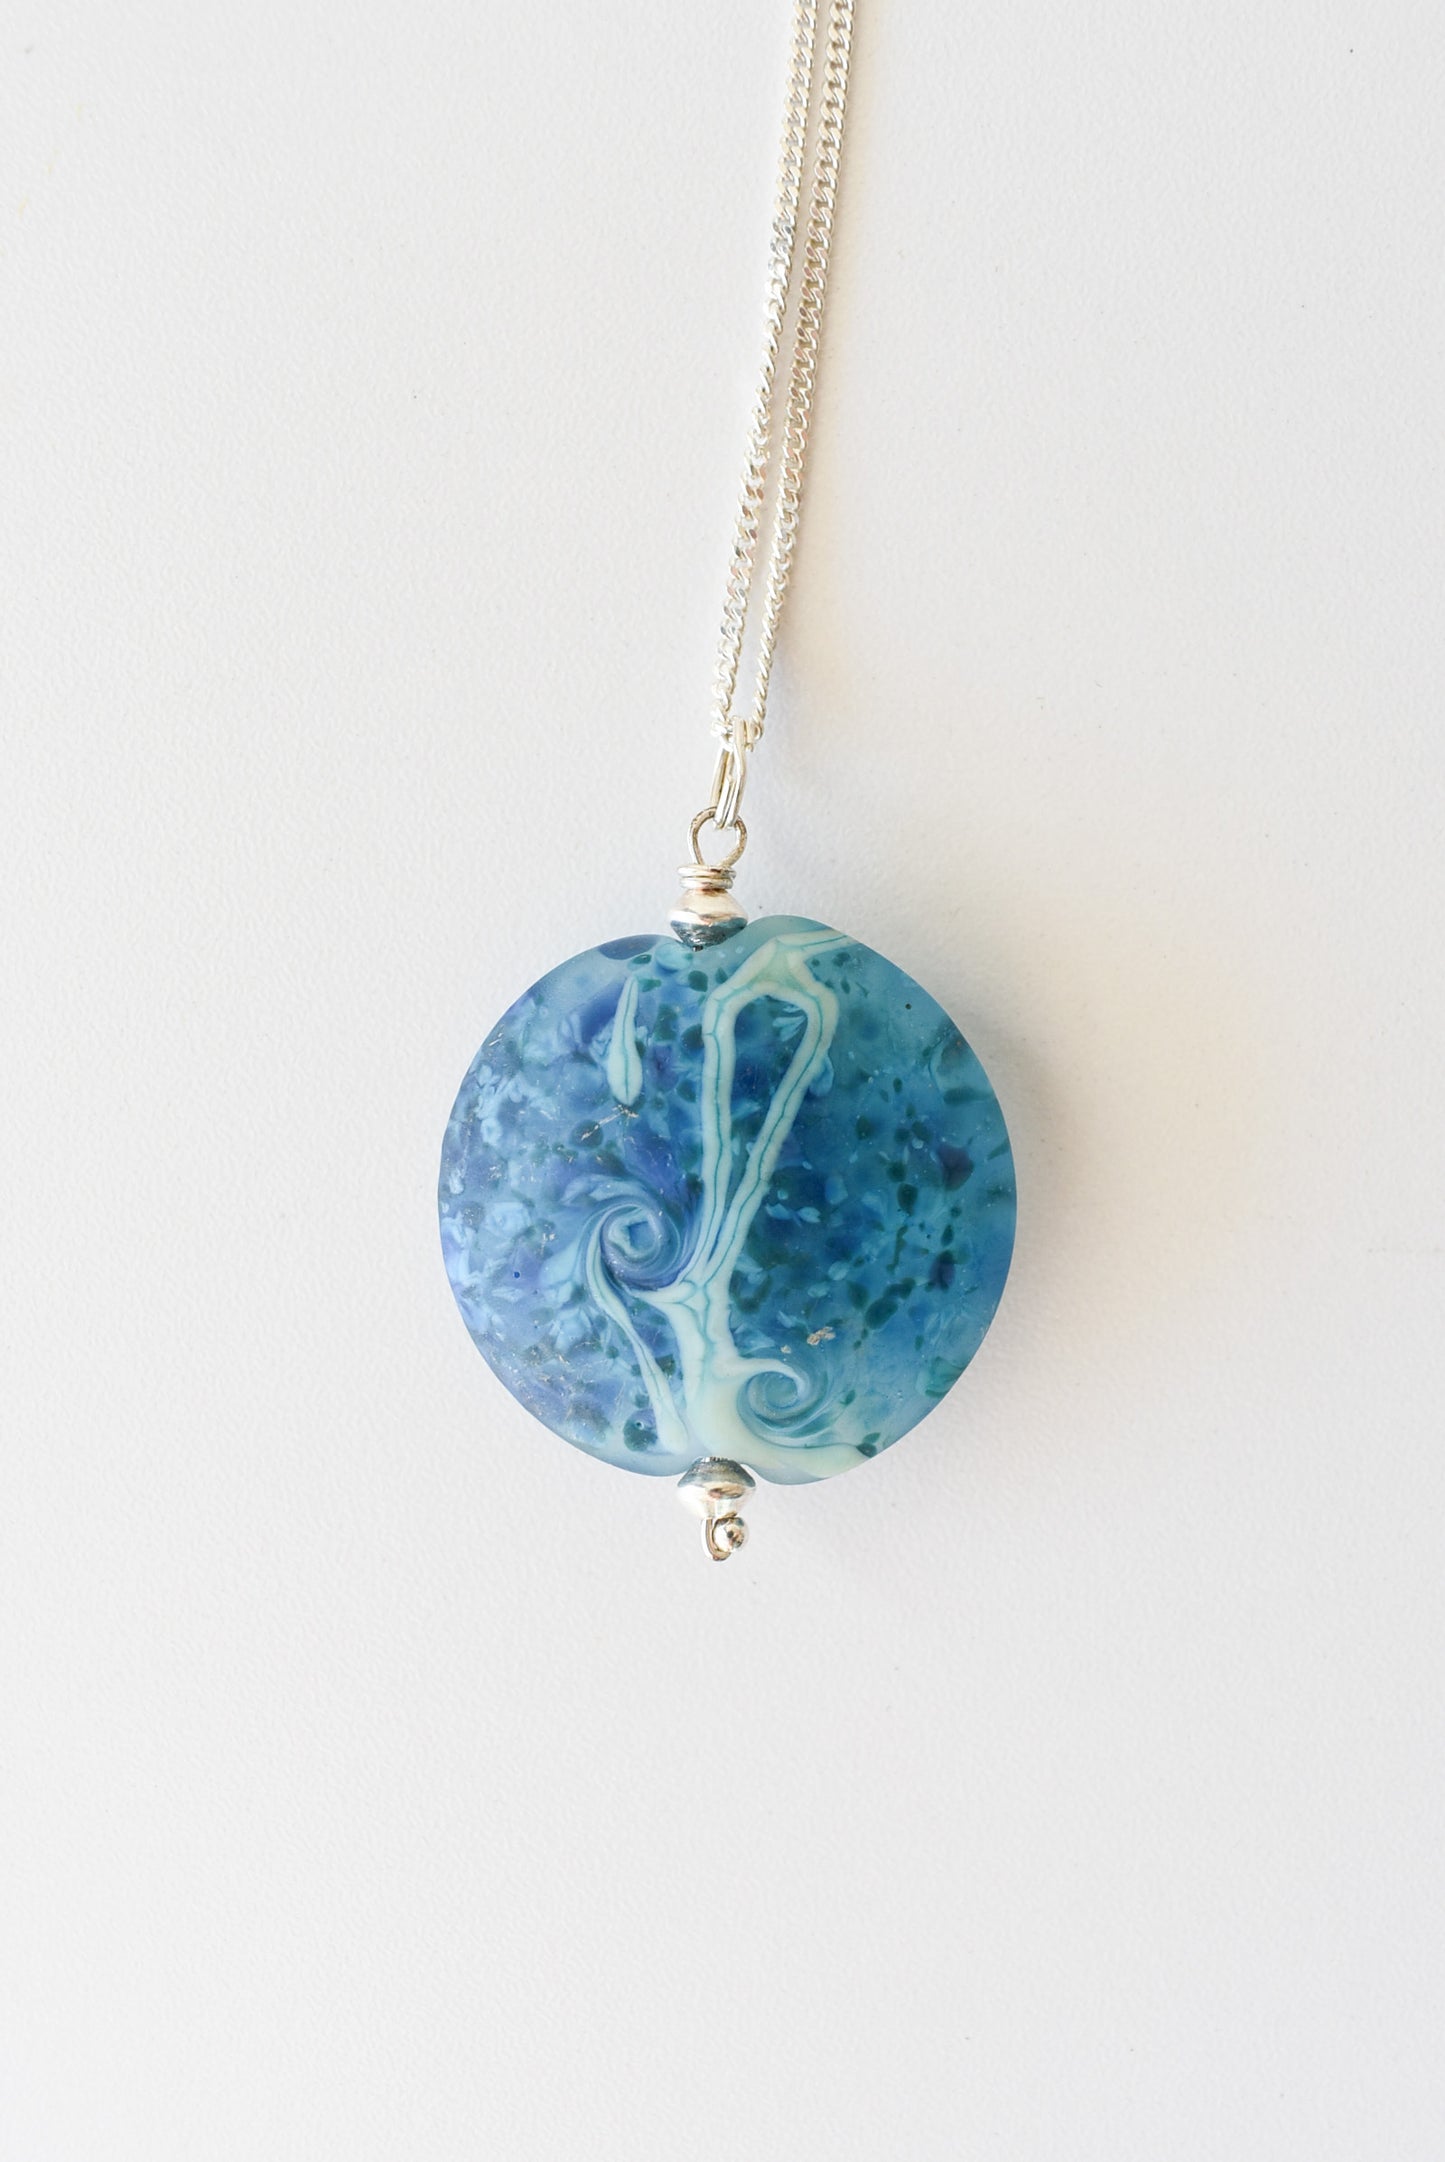 Round blue pendant on silver chain